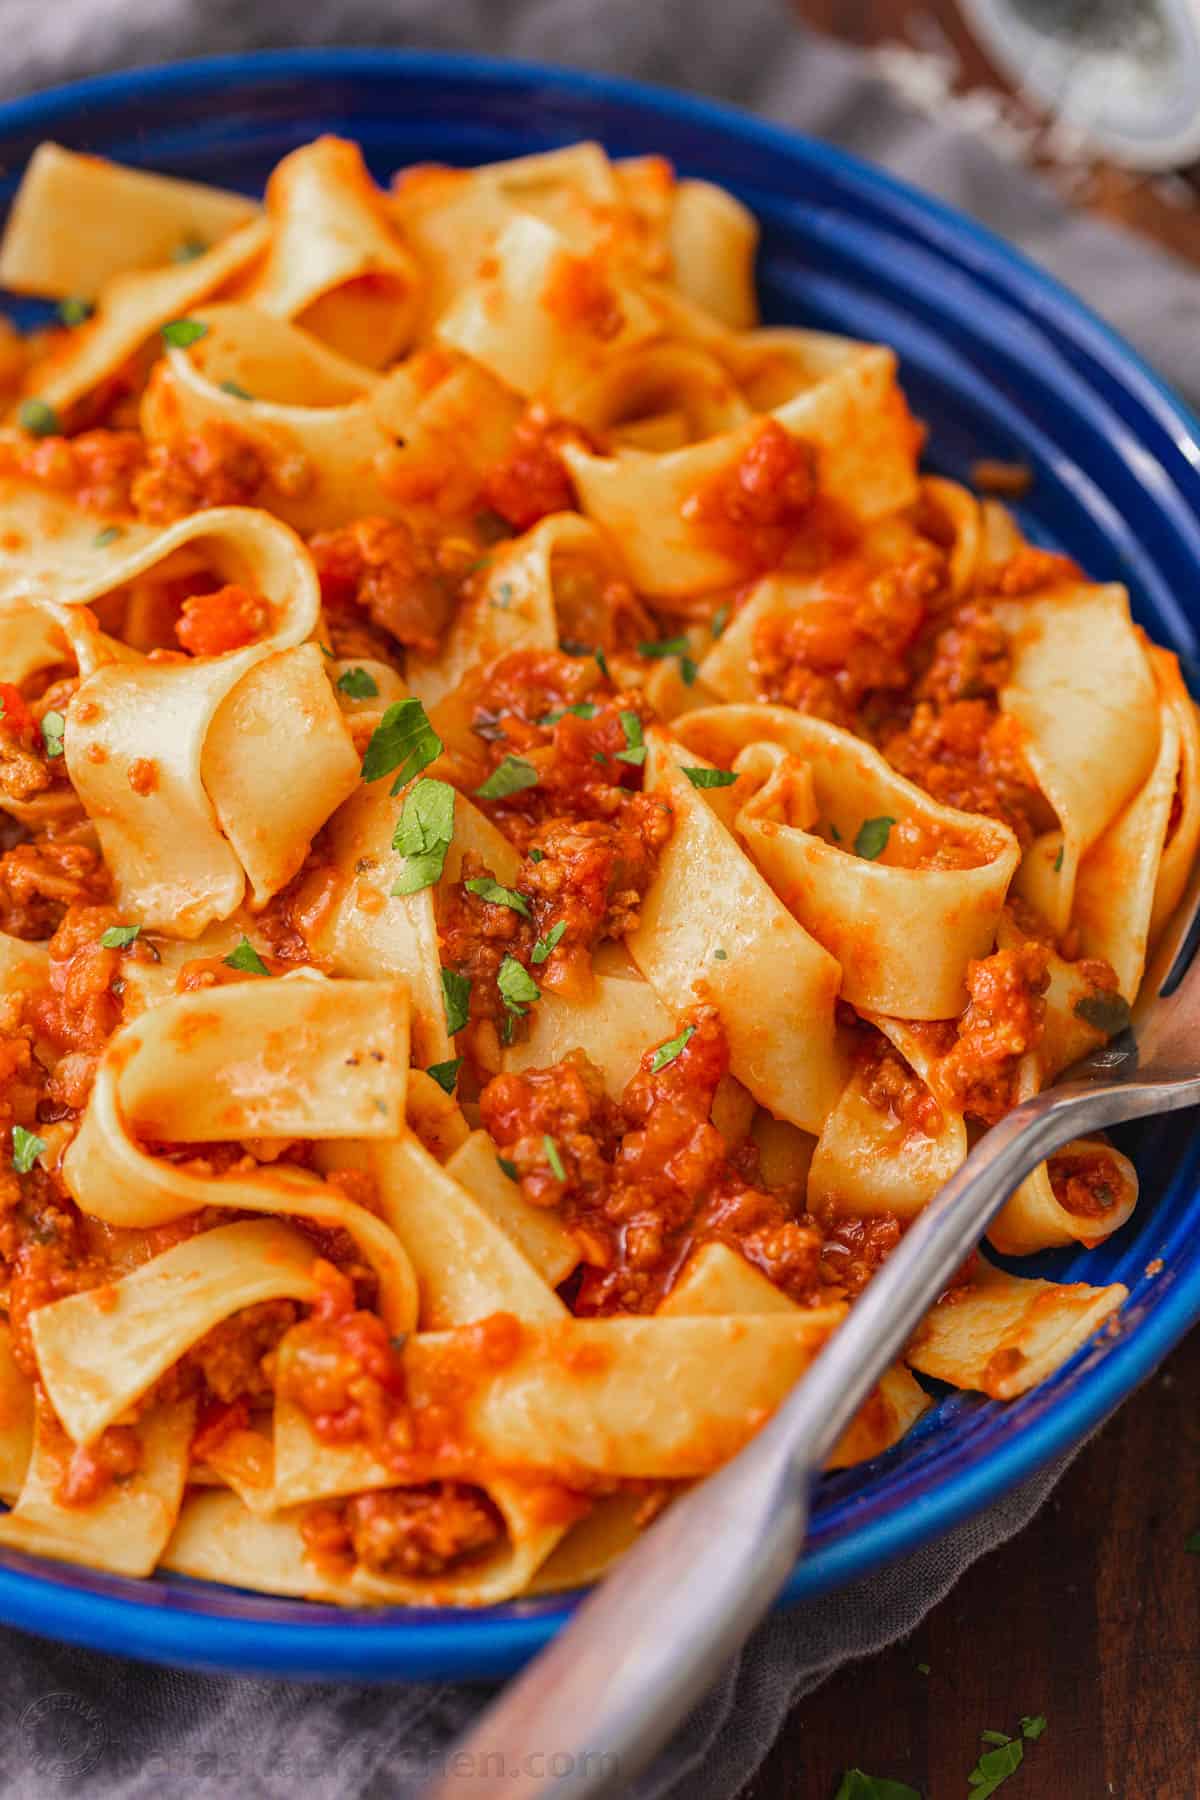 Pappardelle pasta with bolognese sauce in a blue bowl, with a fork.